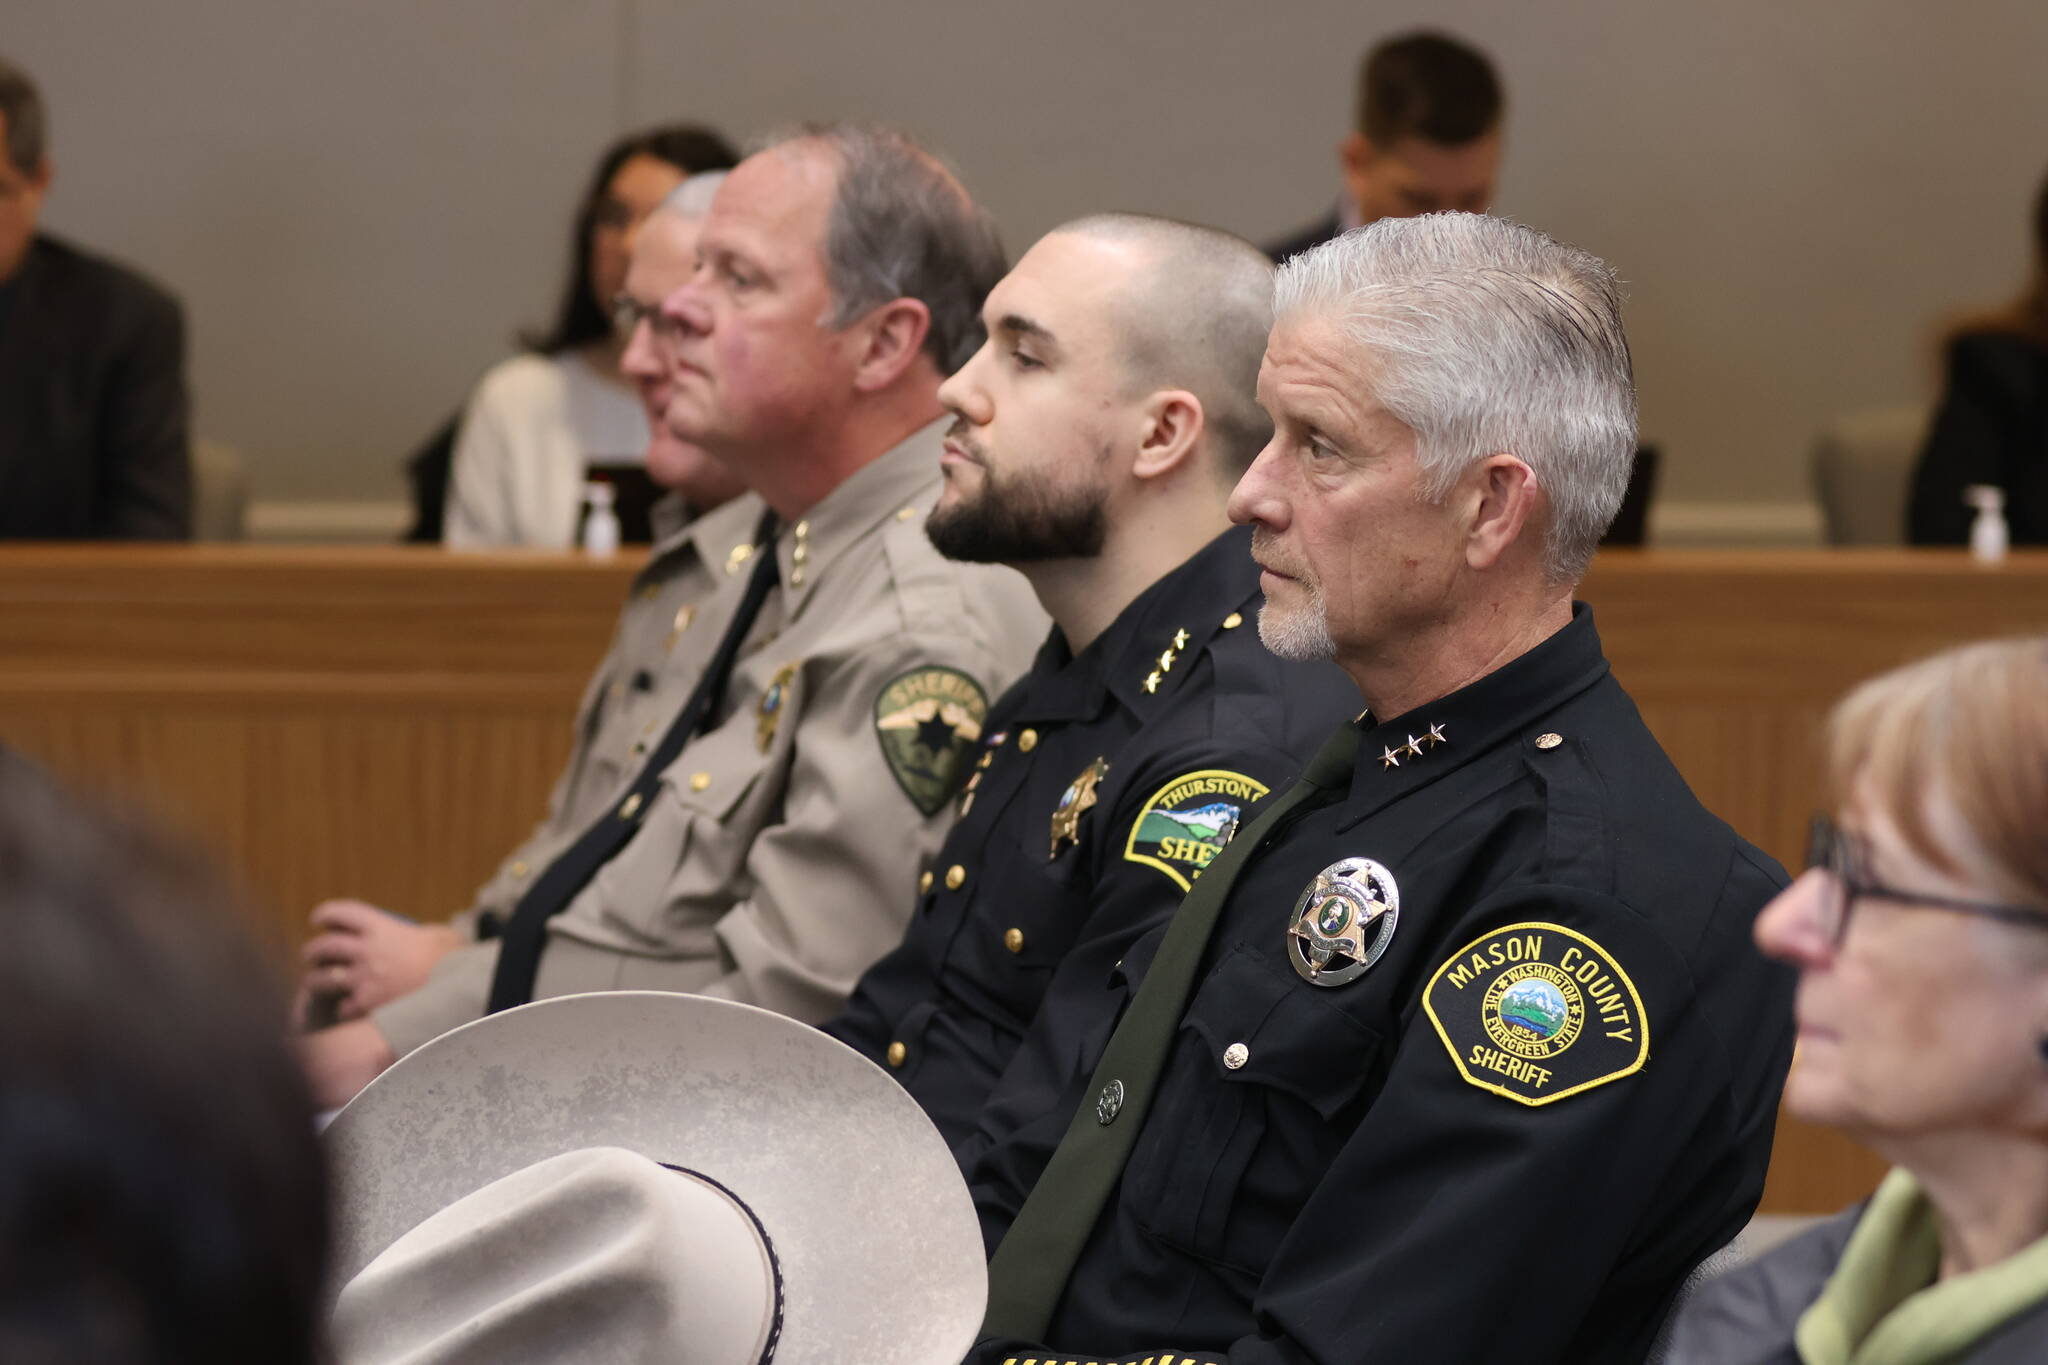 Sheriffs and police chiefs watch during a public hearing on a police pursuit initiative in Olympia on Wednesday. (Michael S. Lockett / The Daily World)